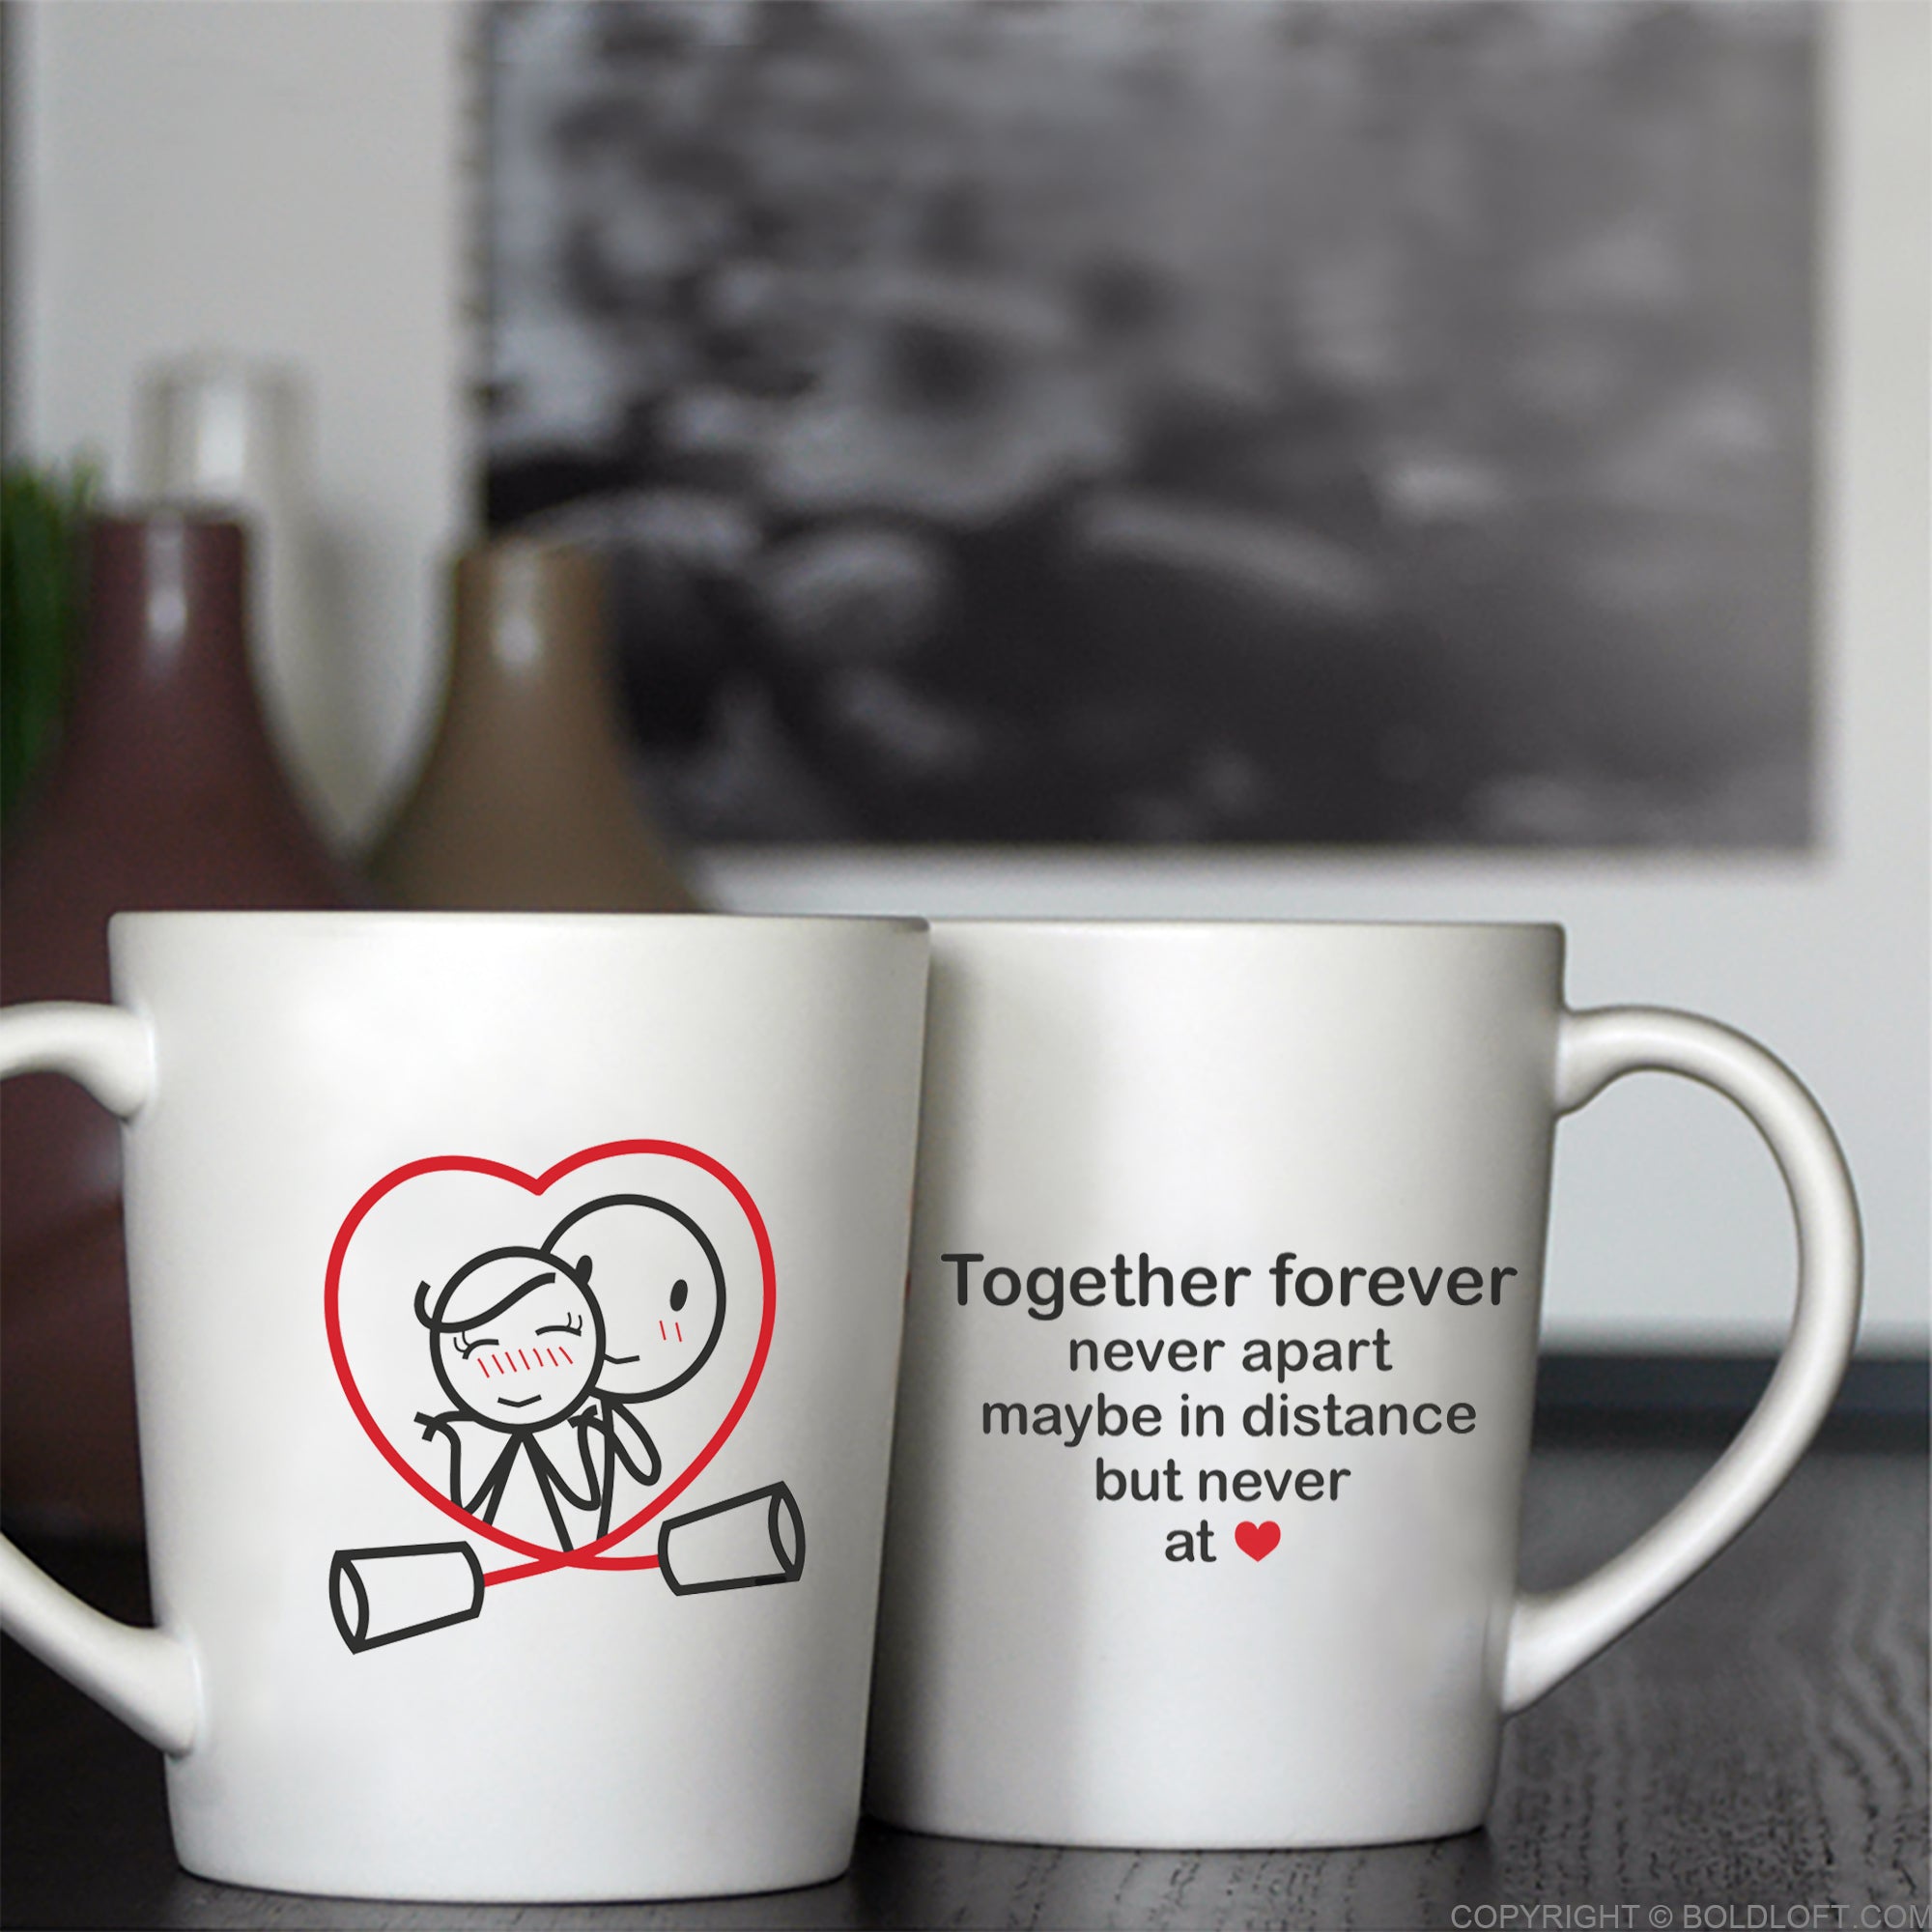 BoldLoft Together Forever™ Couple Mugs - His and hers coffee mugs with love quotes and heartfelt designs for long distance couples